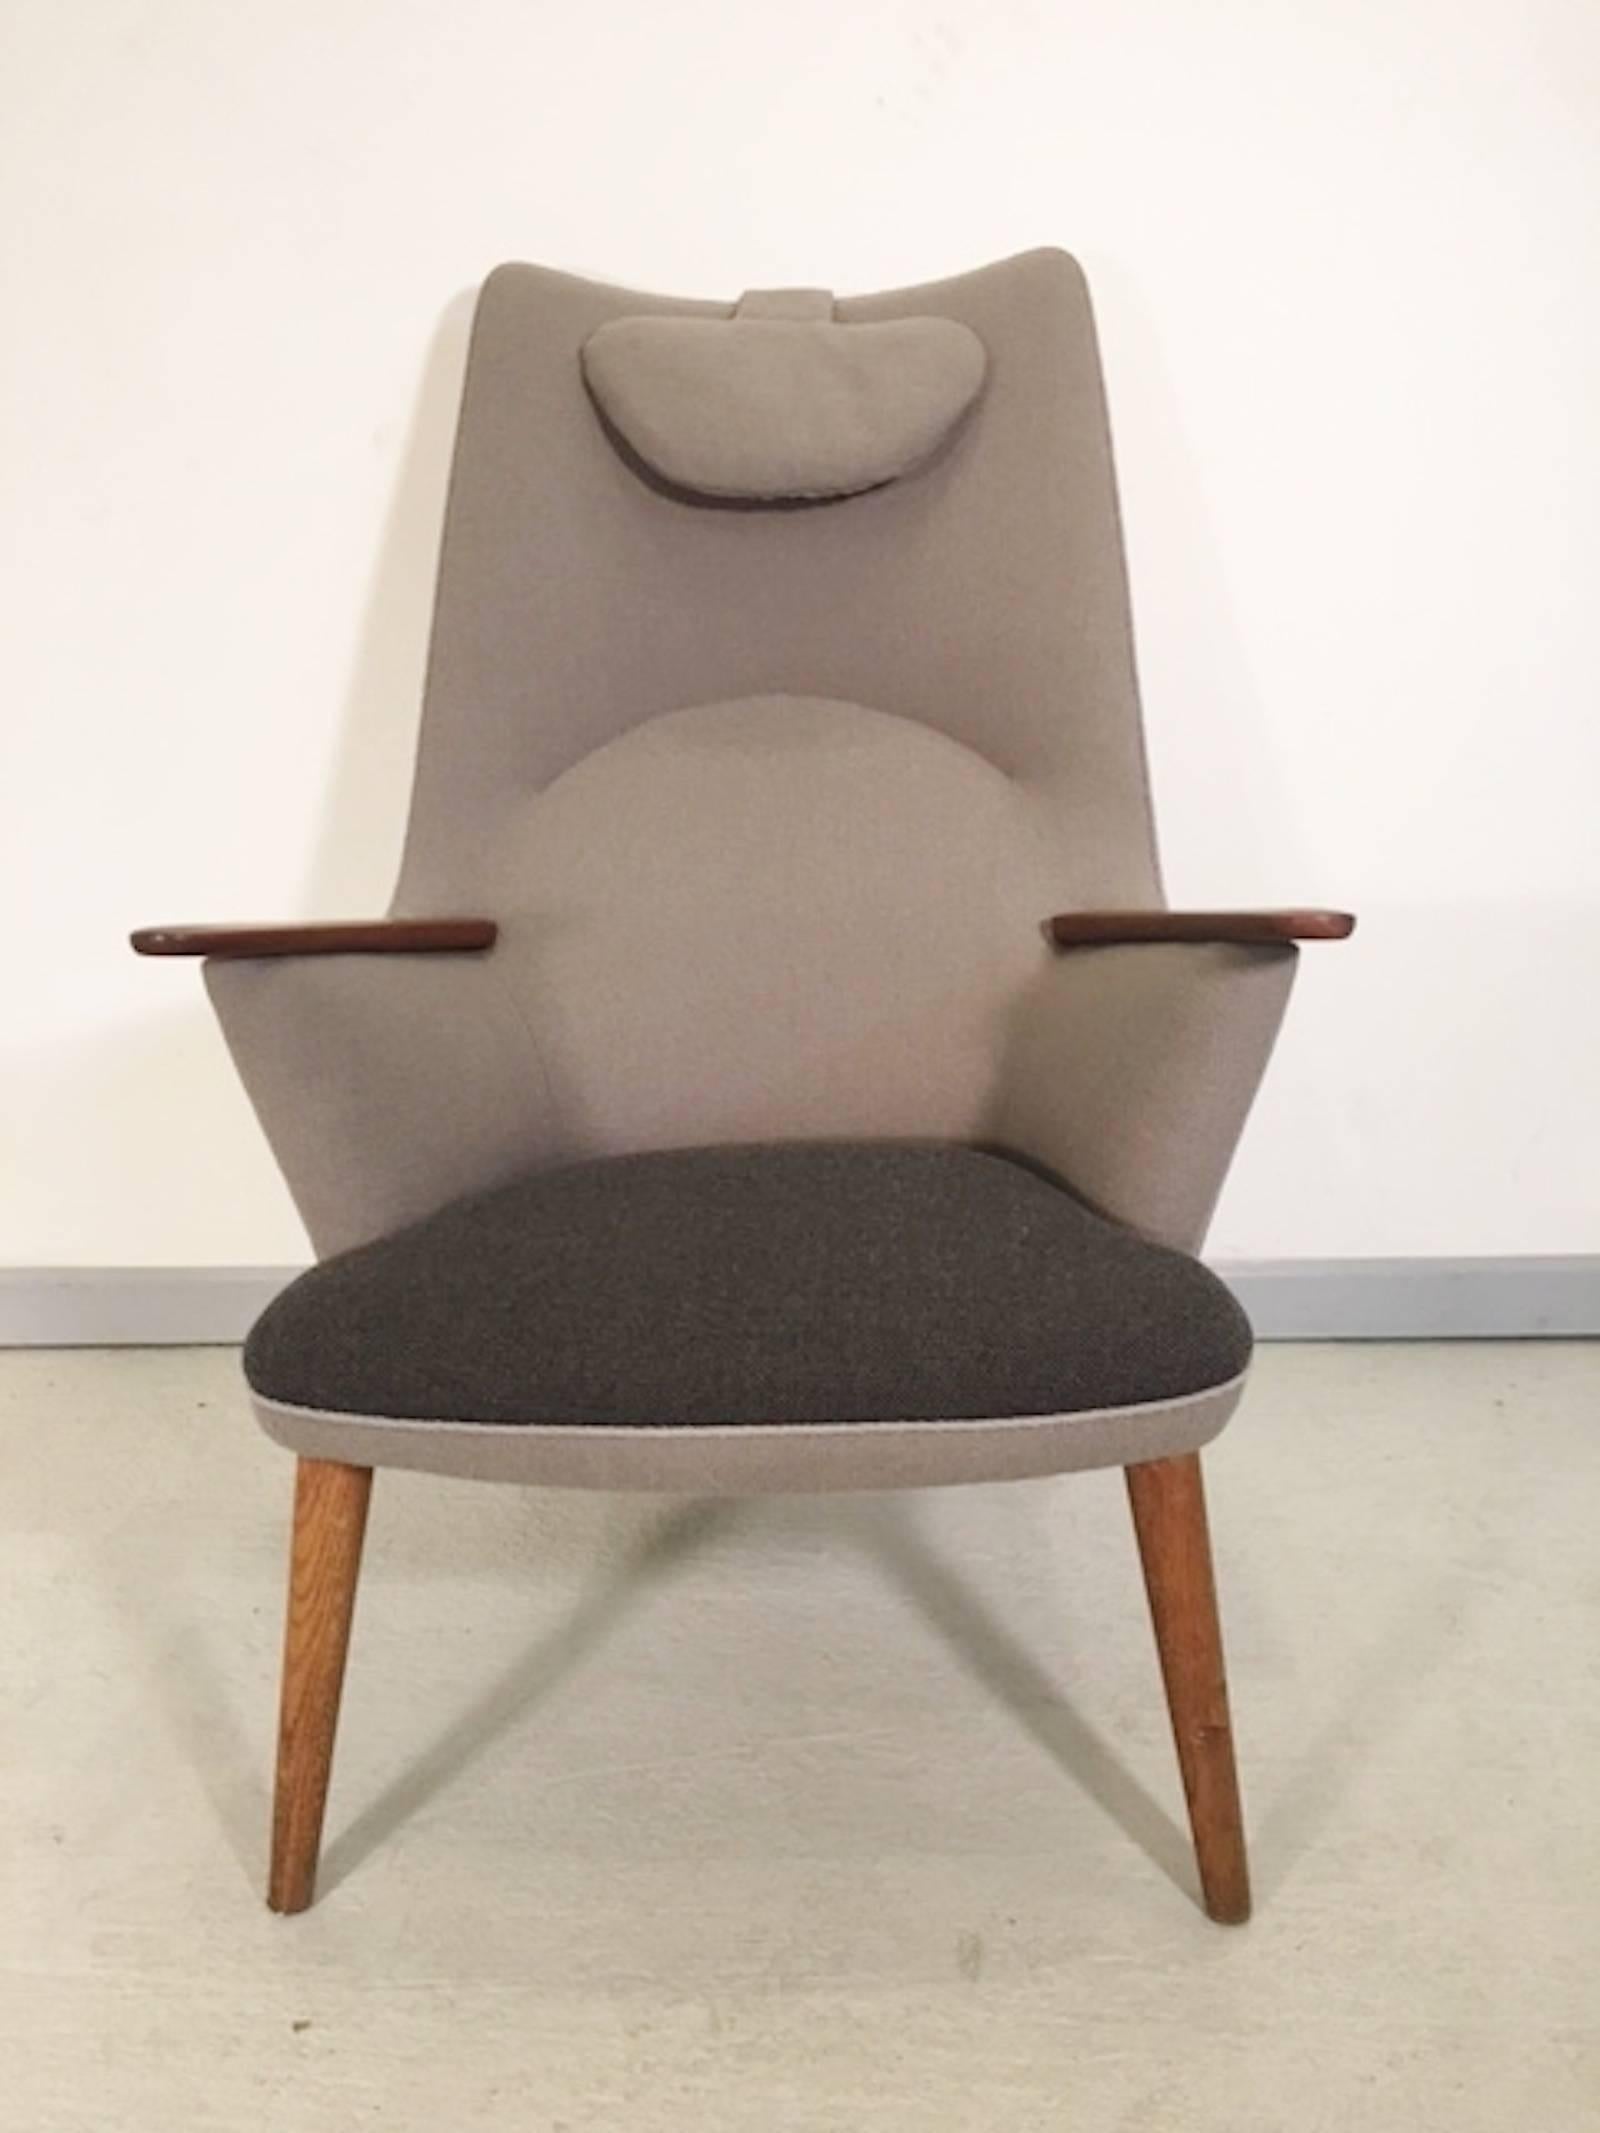 Hans Wegner is one the most iconic Mid-Century Modern designers, and this is a great example of his esthetic. Teak wood arms, sculpted body, tapered legs.
Upholstery in Kvadard Divina wool felt.

(Please confirm item location with